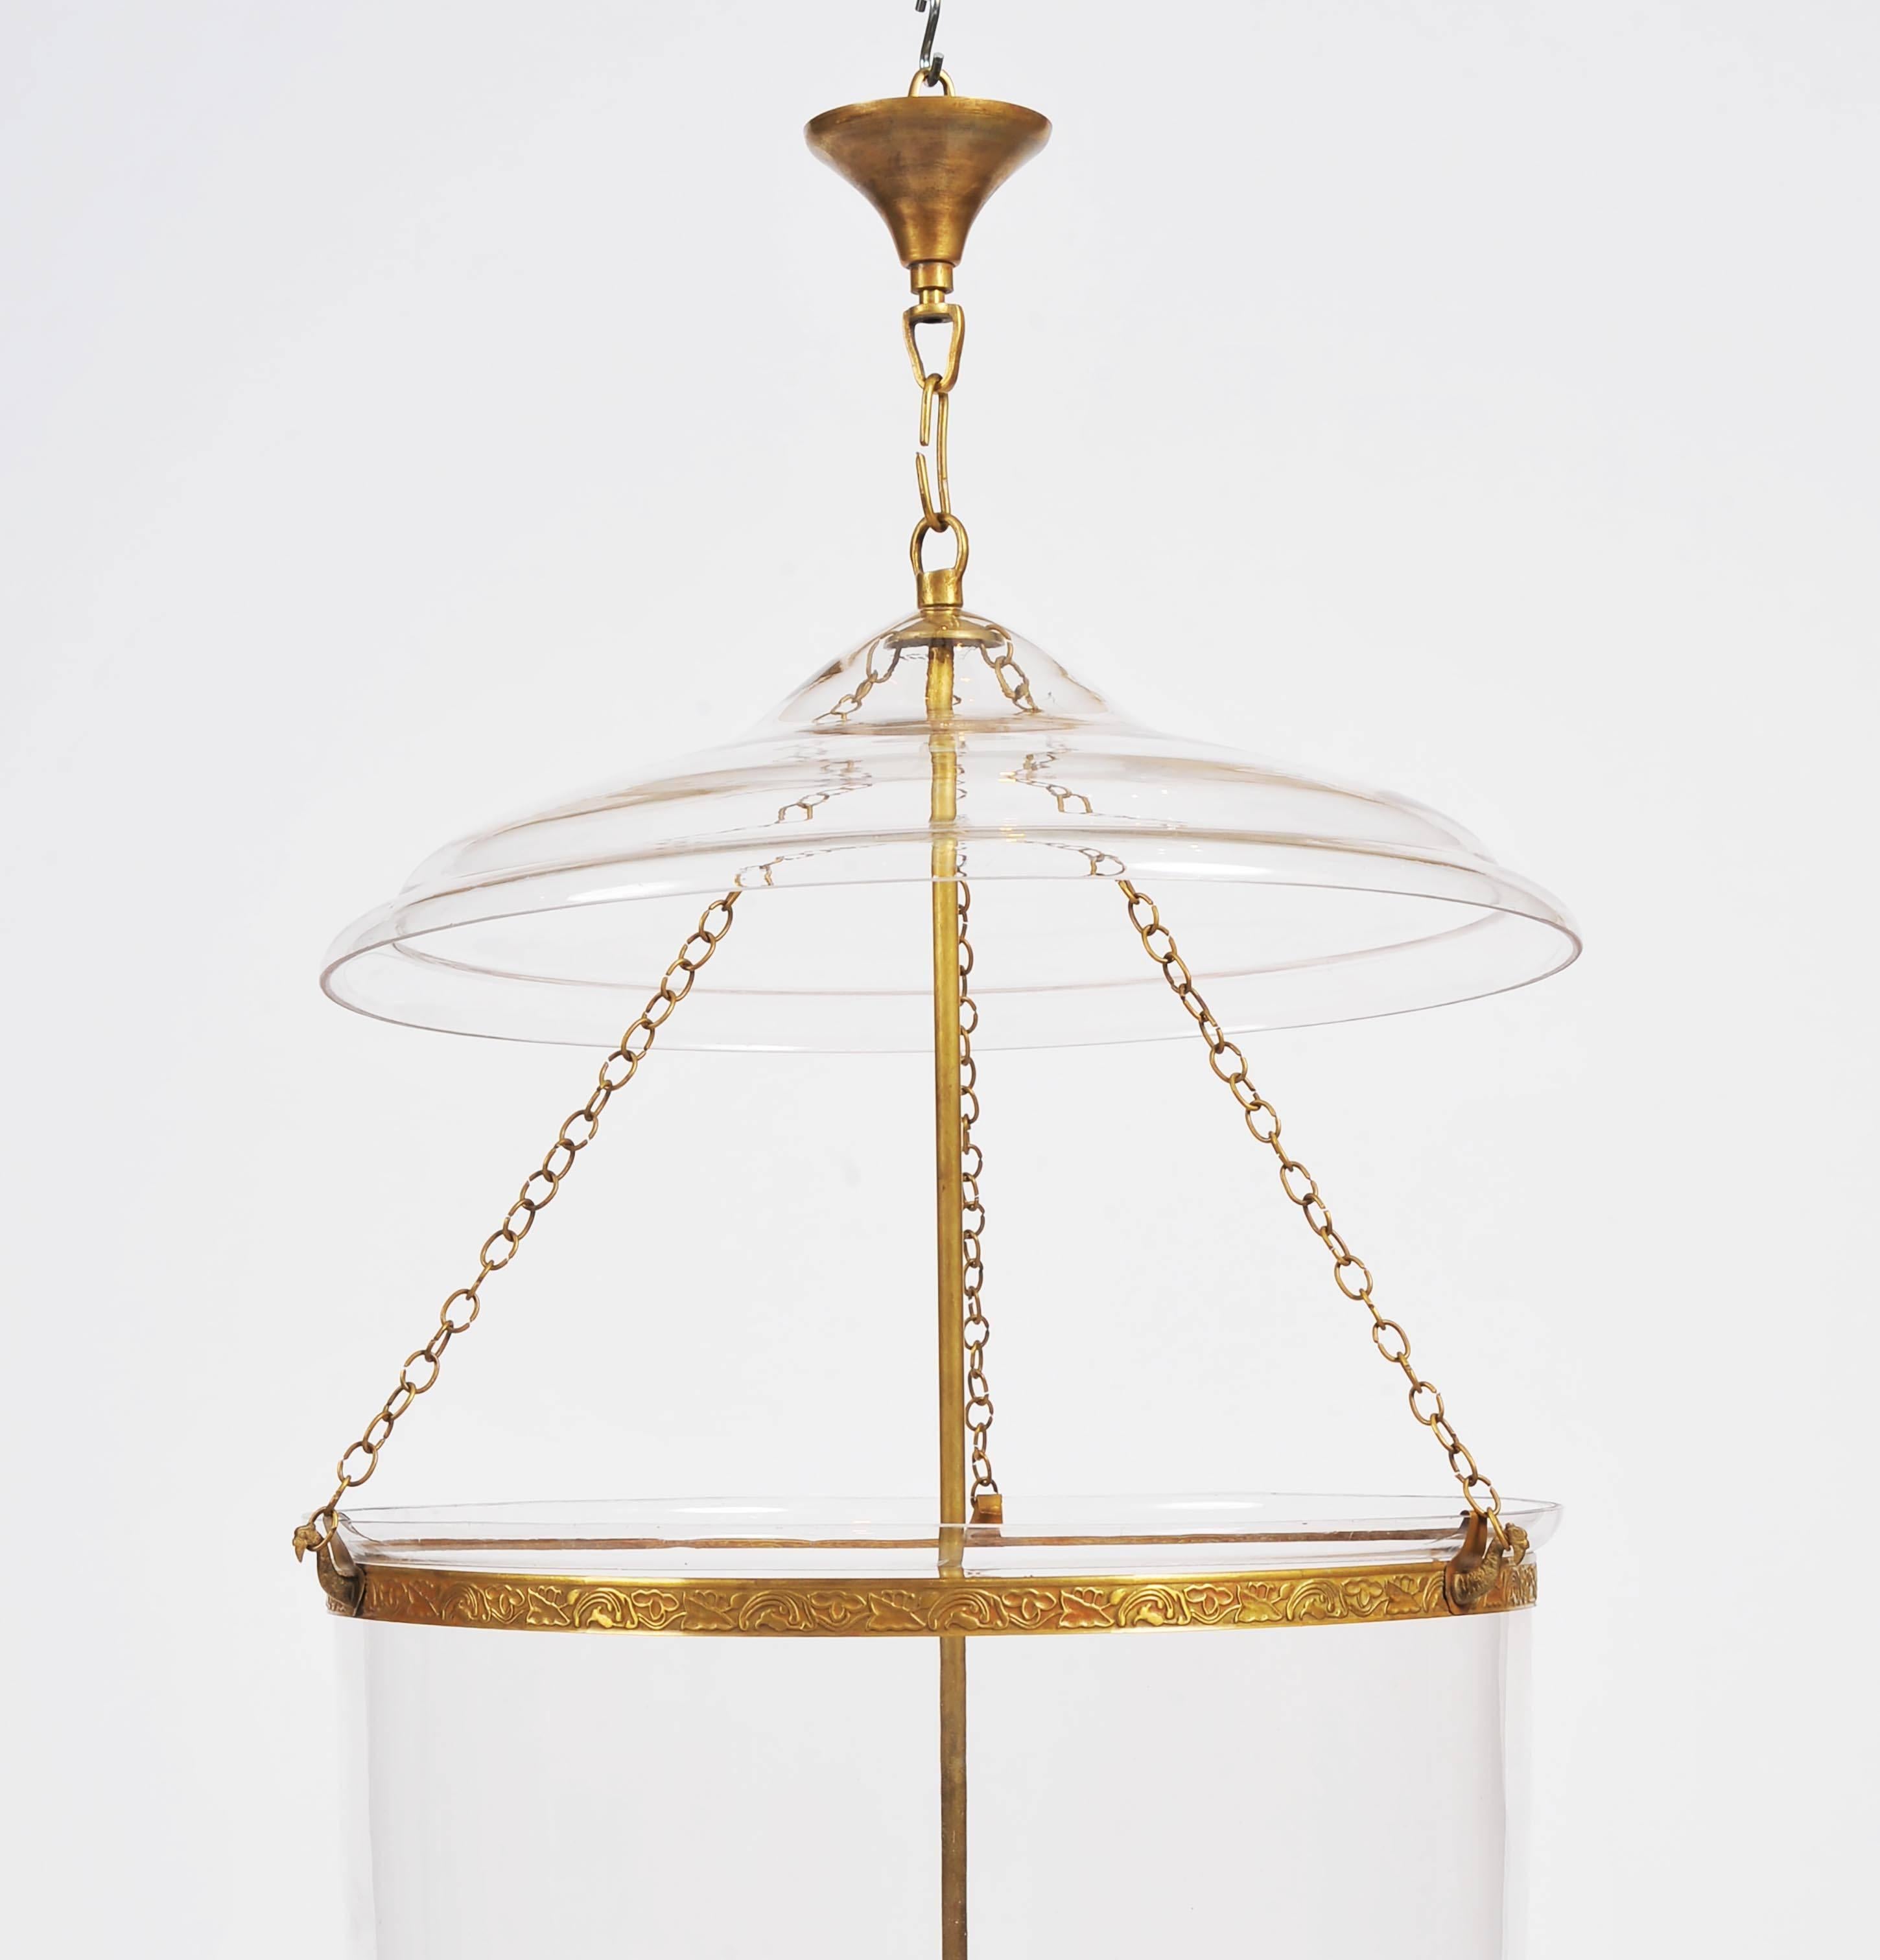 This elegant and well-proportioned handmade glass storm lantern features a simple yet elegant clear blown glass design with polished brass hardware. The lantern has a separate top plate and features an internal 4 light fitting. The light measures 14